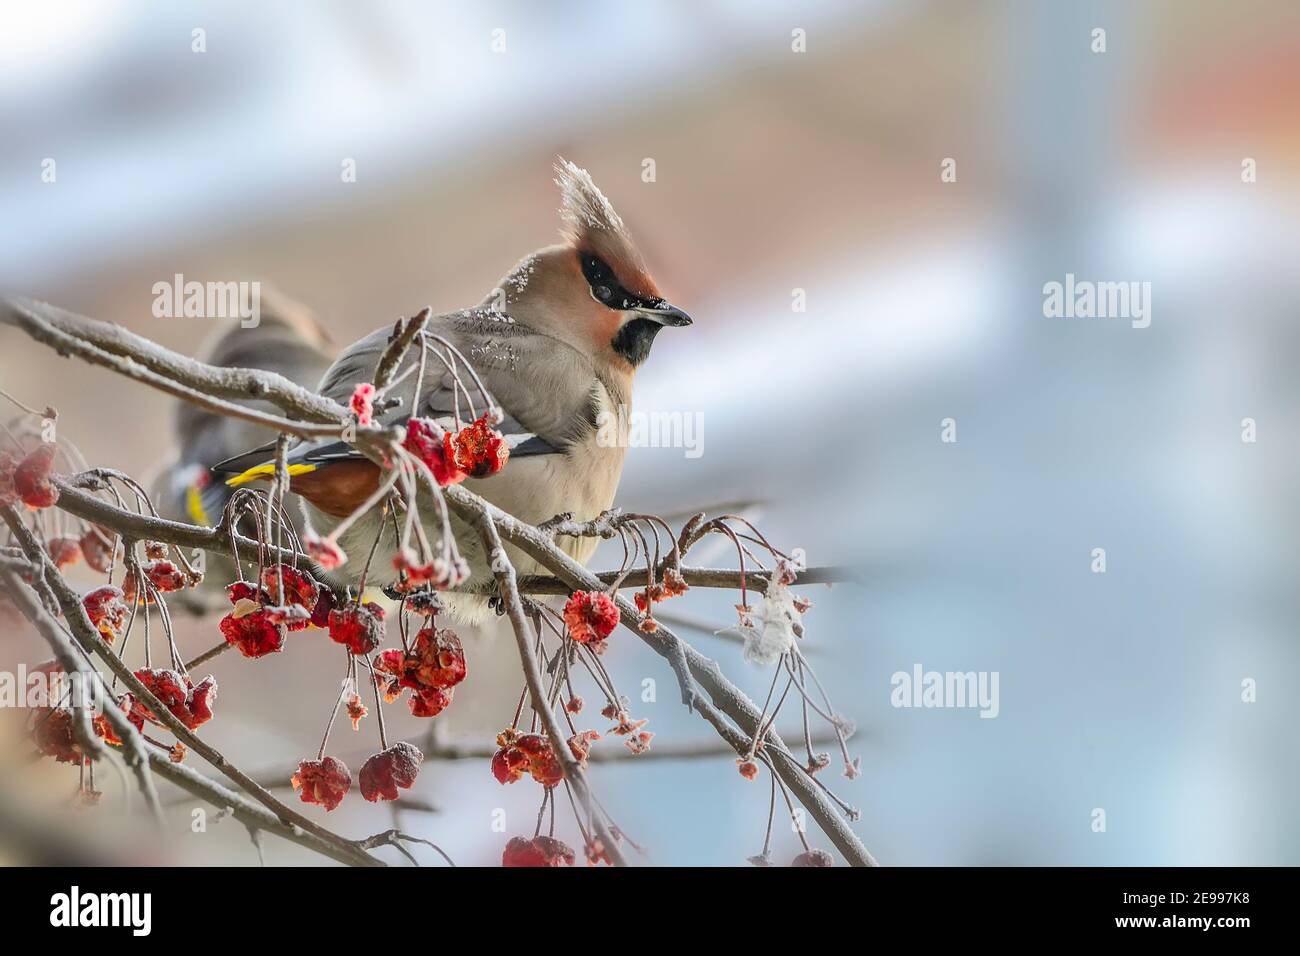 Waxwing (Bombycilla garrulus) on crabapple tree branch with red fruits feeding. Close-up portrait of colorful bird in winter wildlife in Siberia on bl Stock Photo